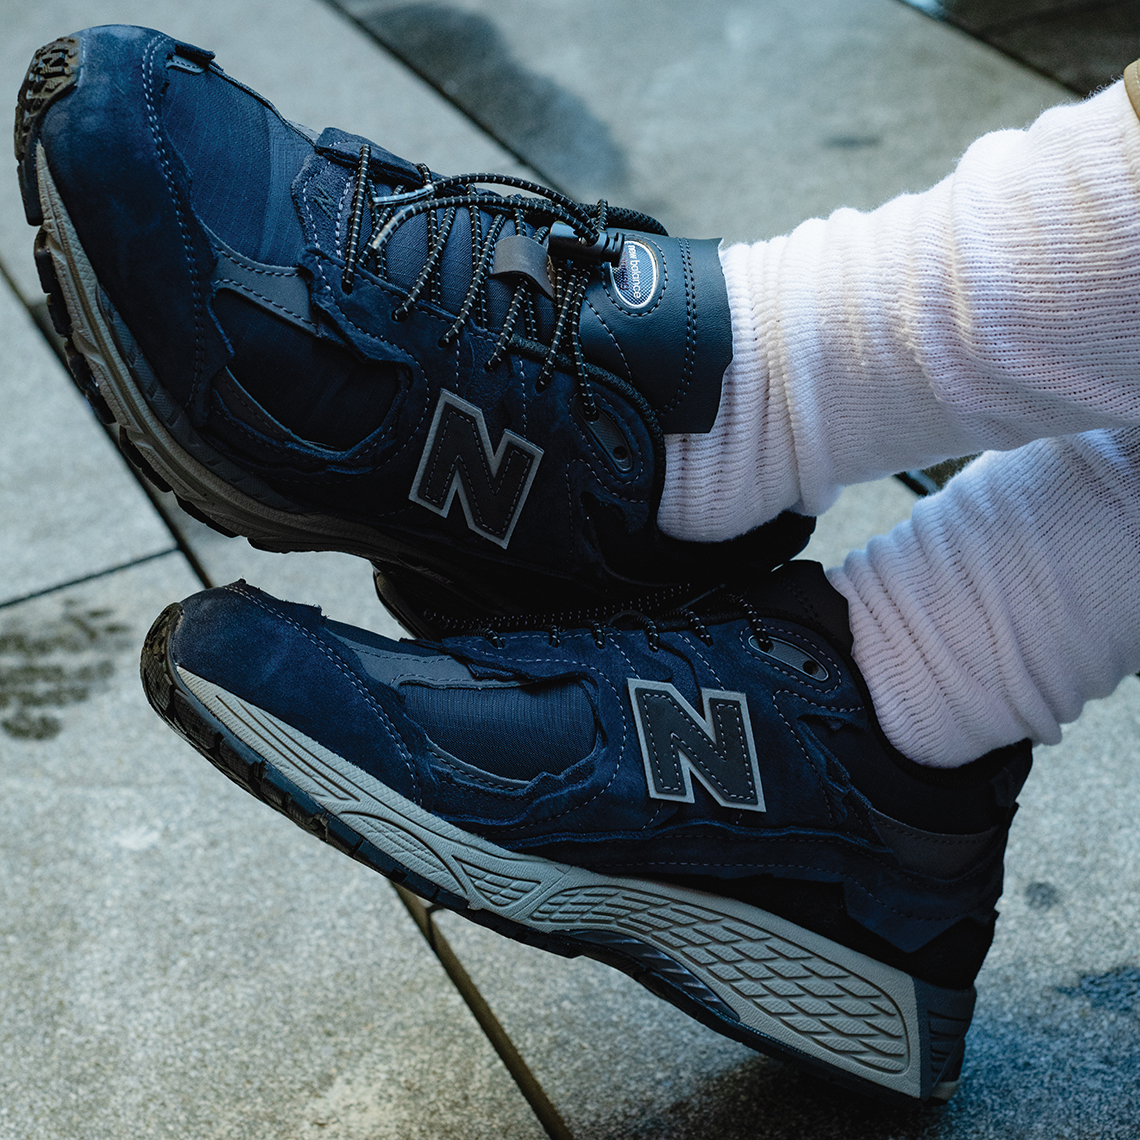 NEW BALANCE M998 INDEPENDENCE DAY